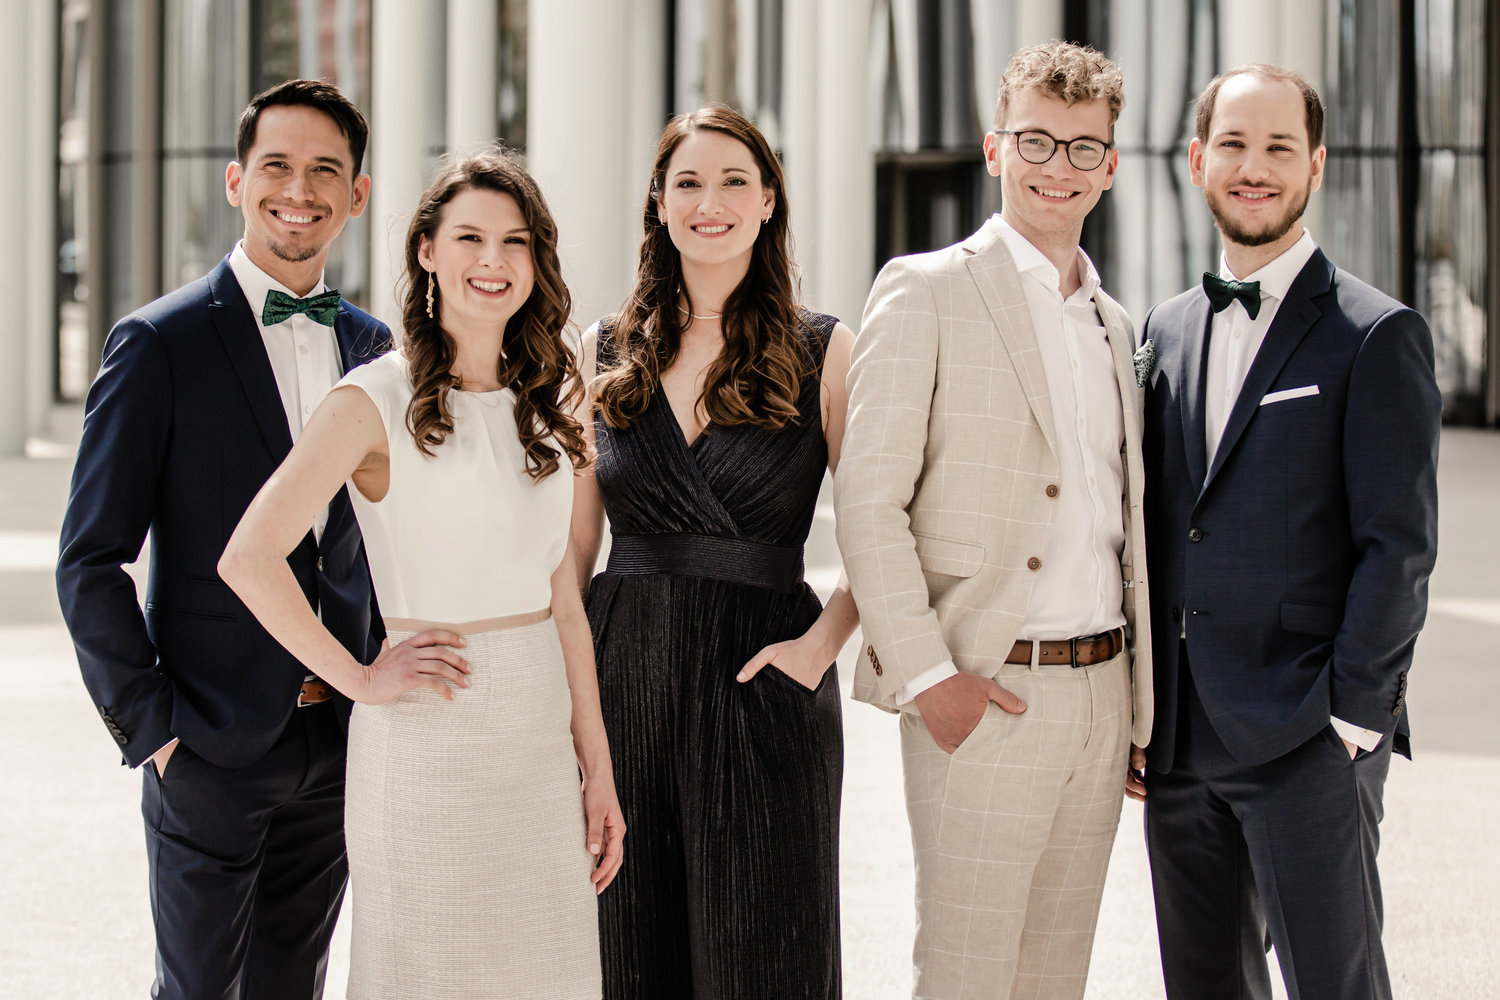 The Calmus Ensemble Liepzig will perform on Sunday, December 11 at the Milford Theater.